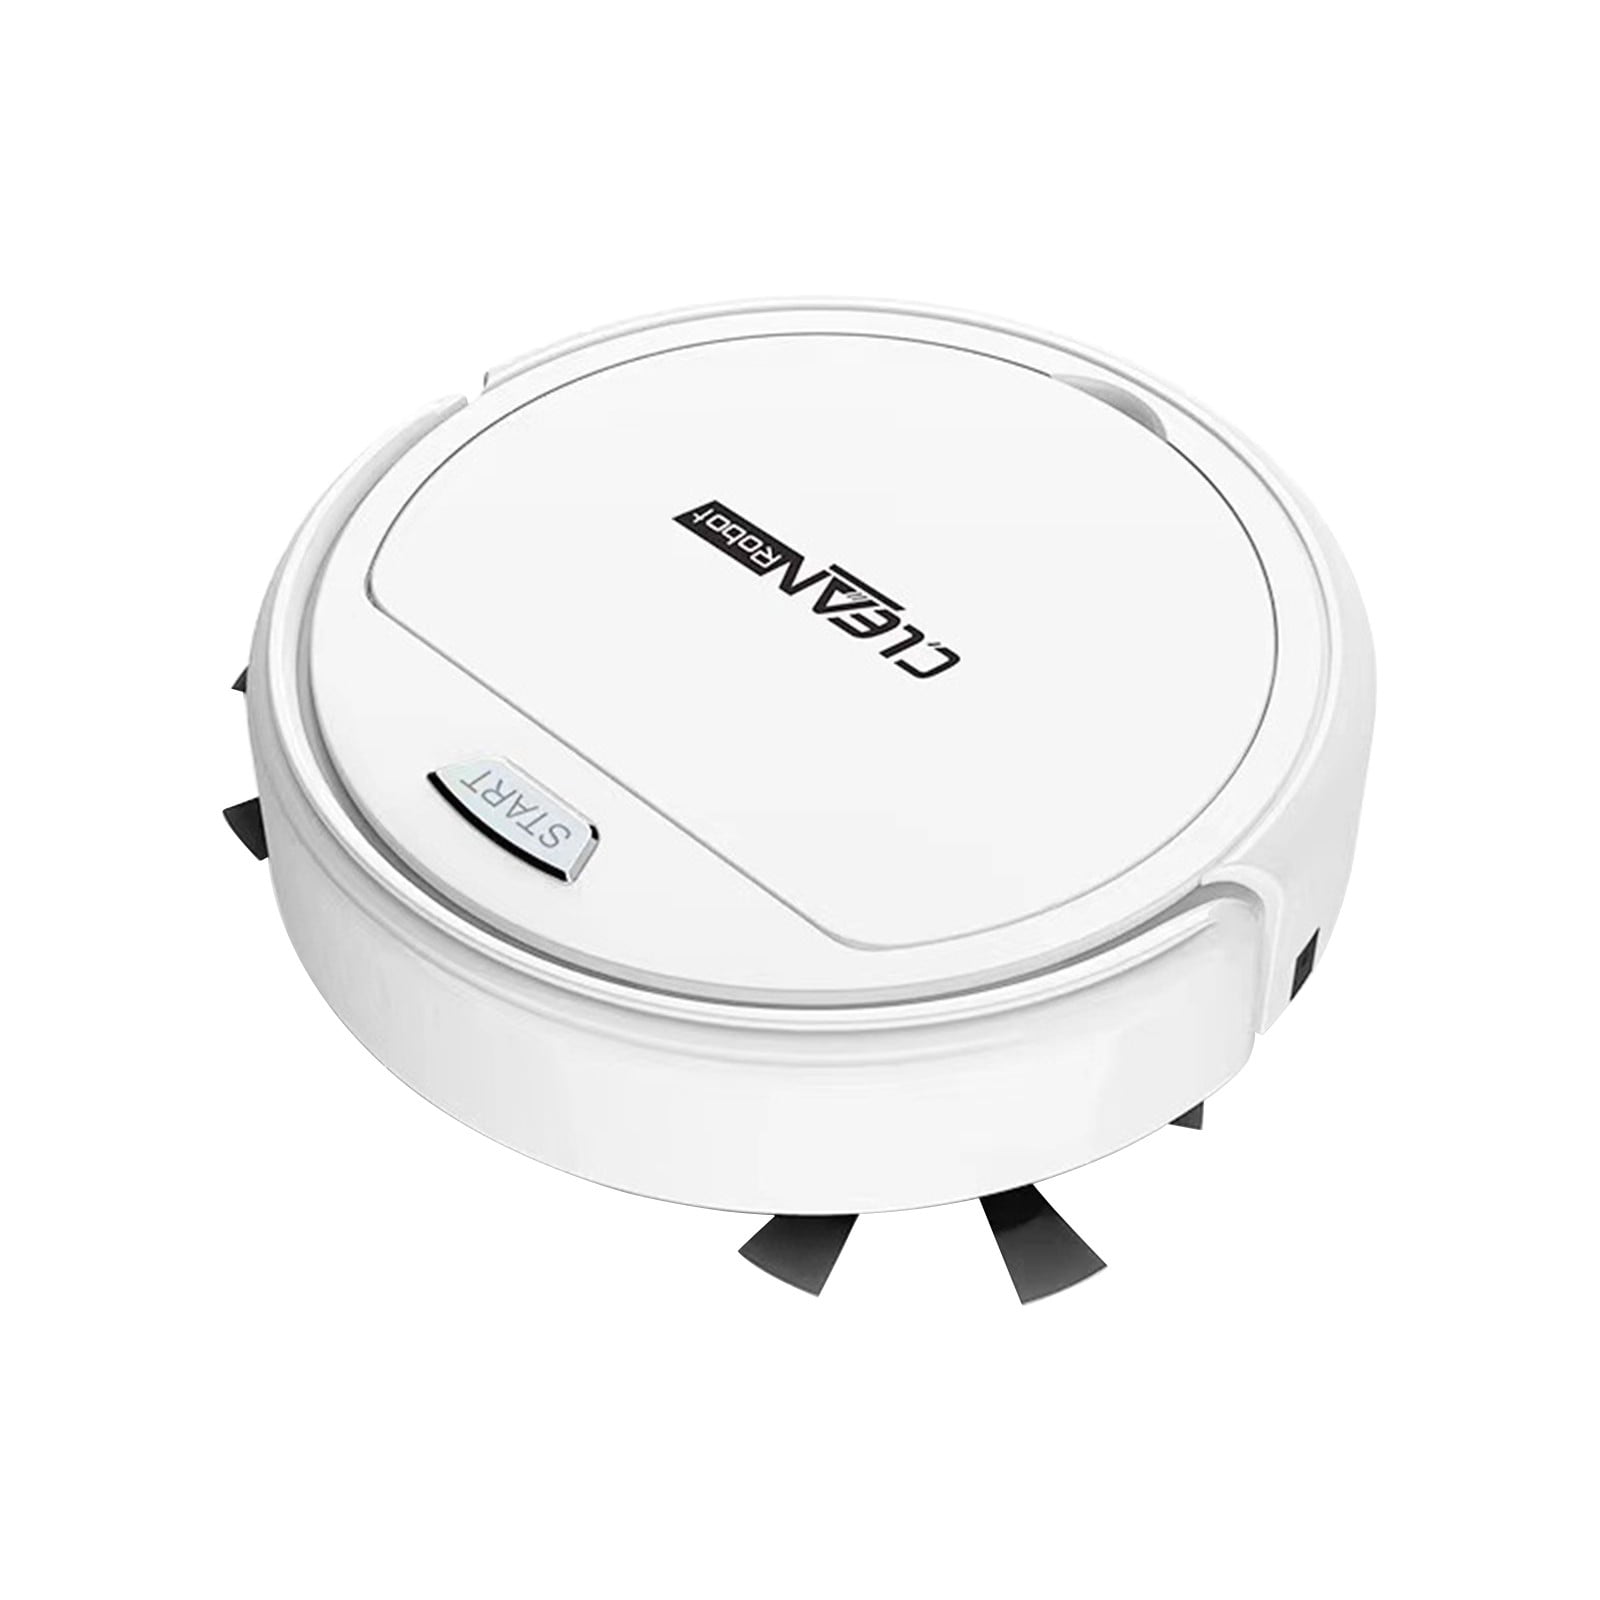 Lefant Robot Vacuum Cleaner and Mop, 160ml Water Tank, 3-in-1